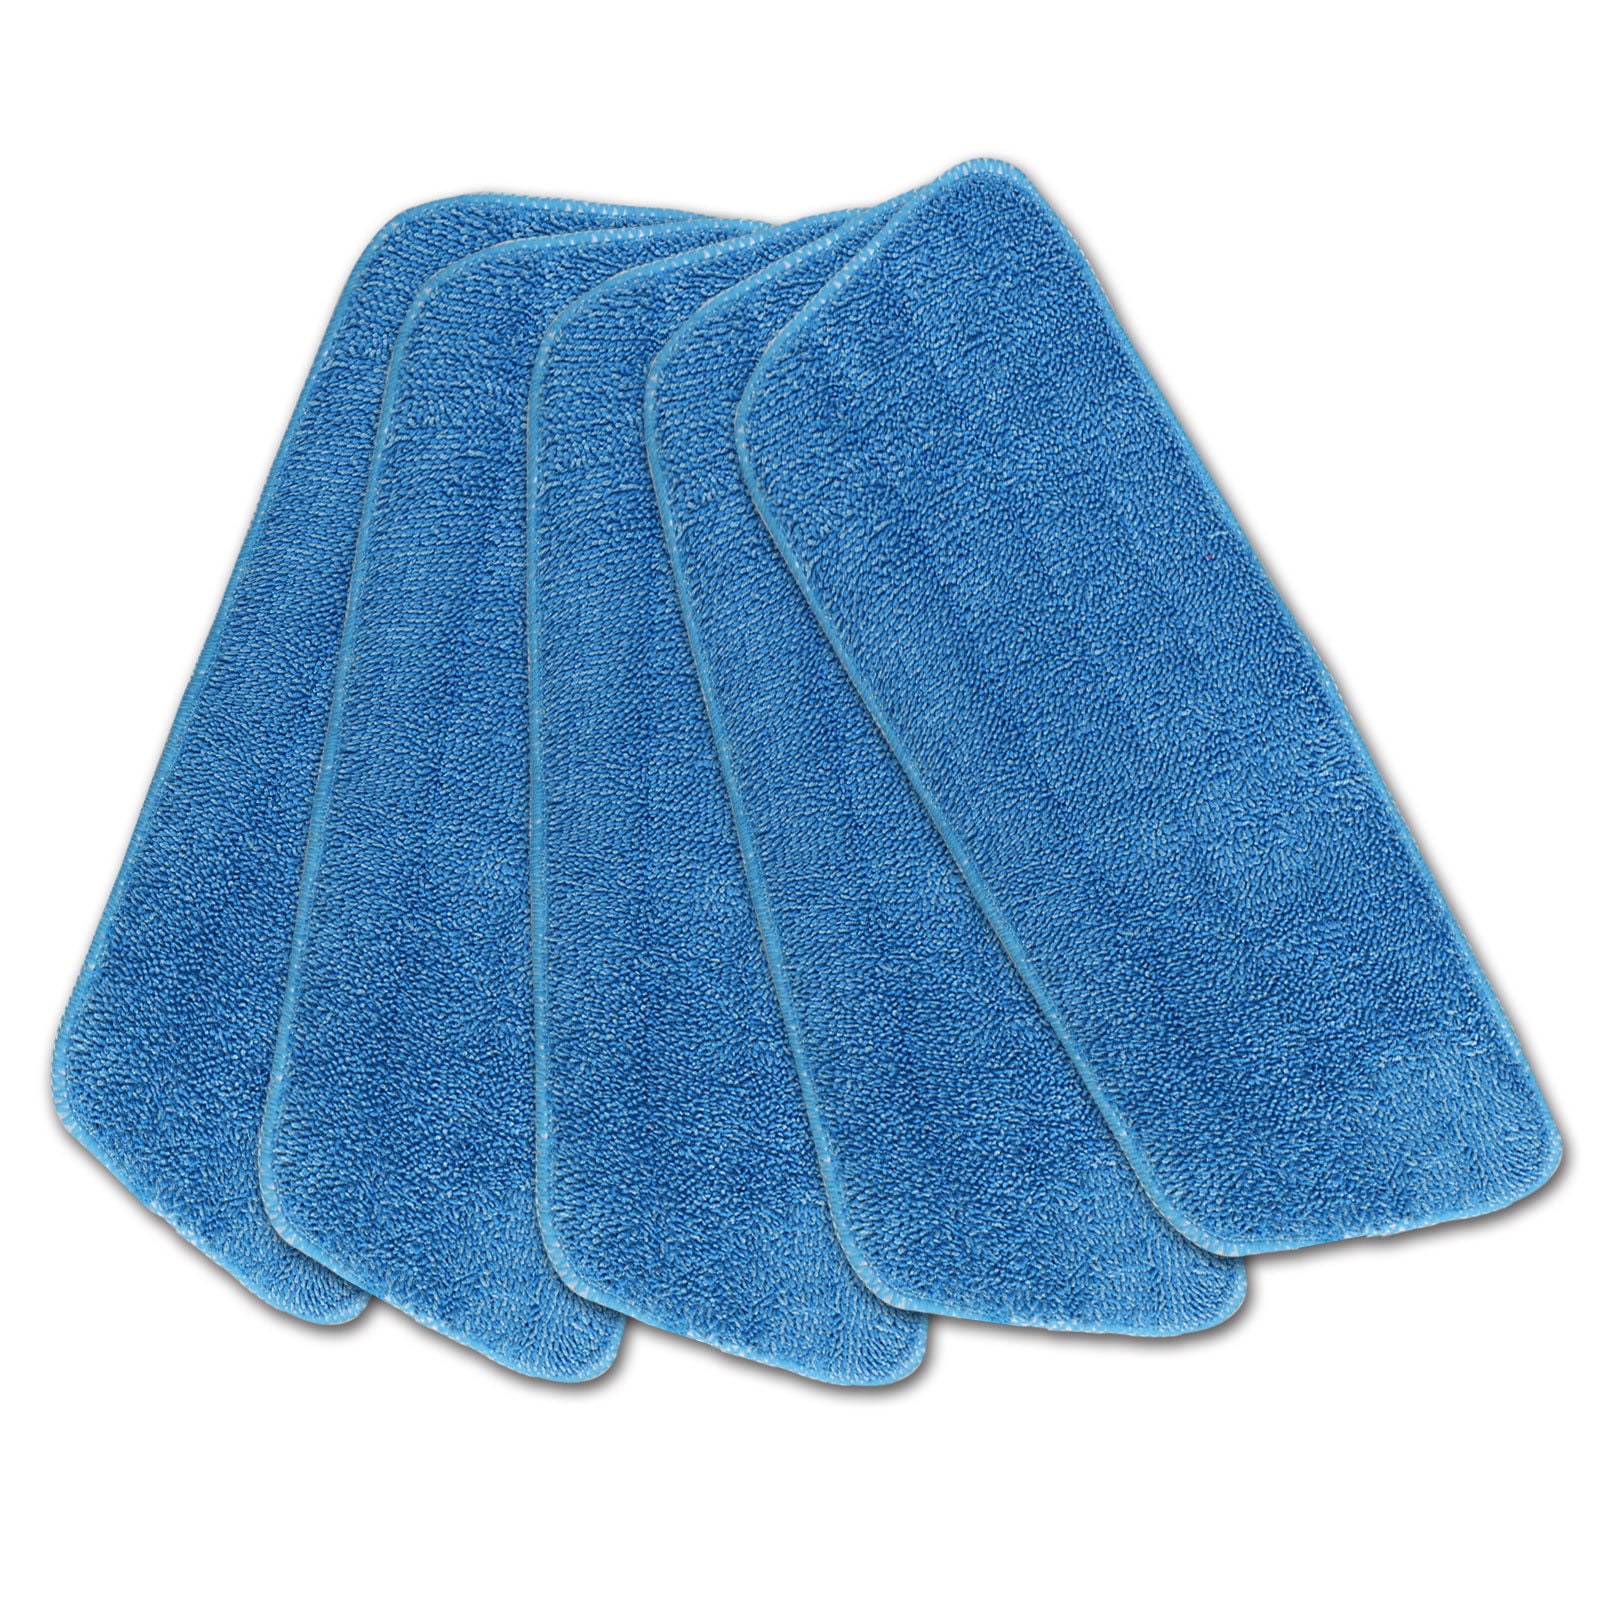 Microfiber Mop Heads Washable Refill Replacement Dust Cloth Cleaning Pad 